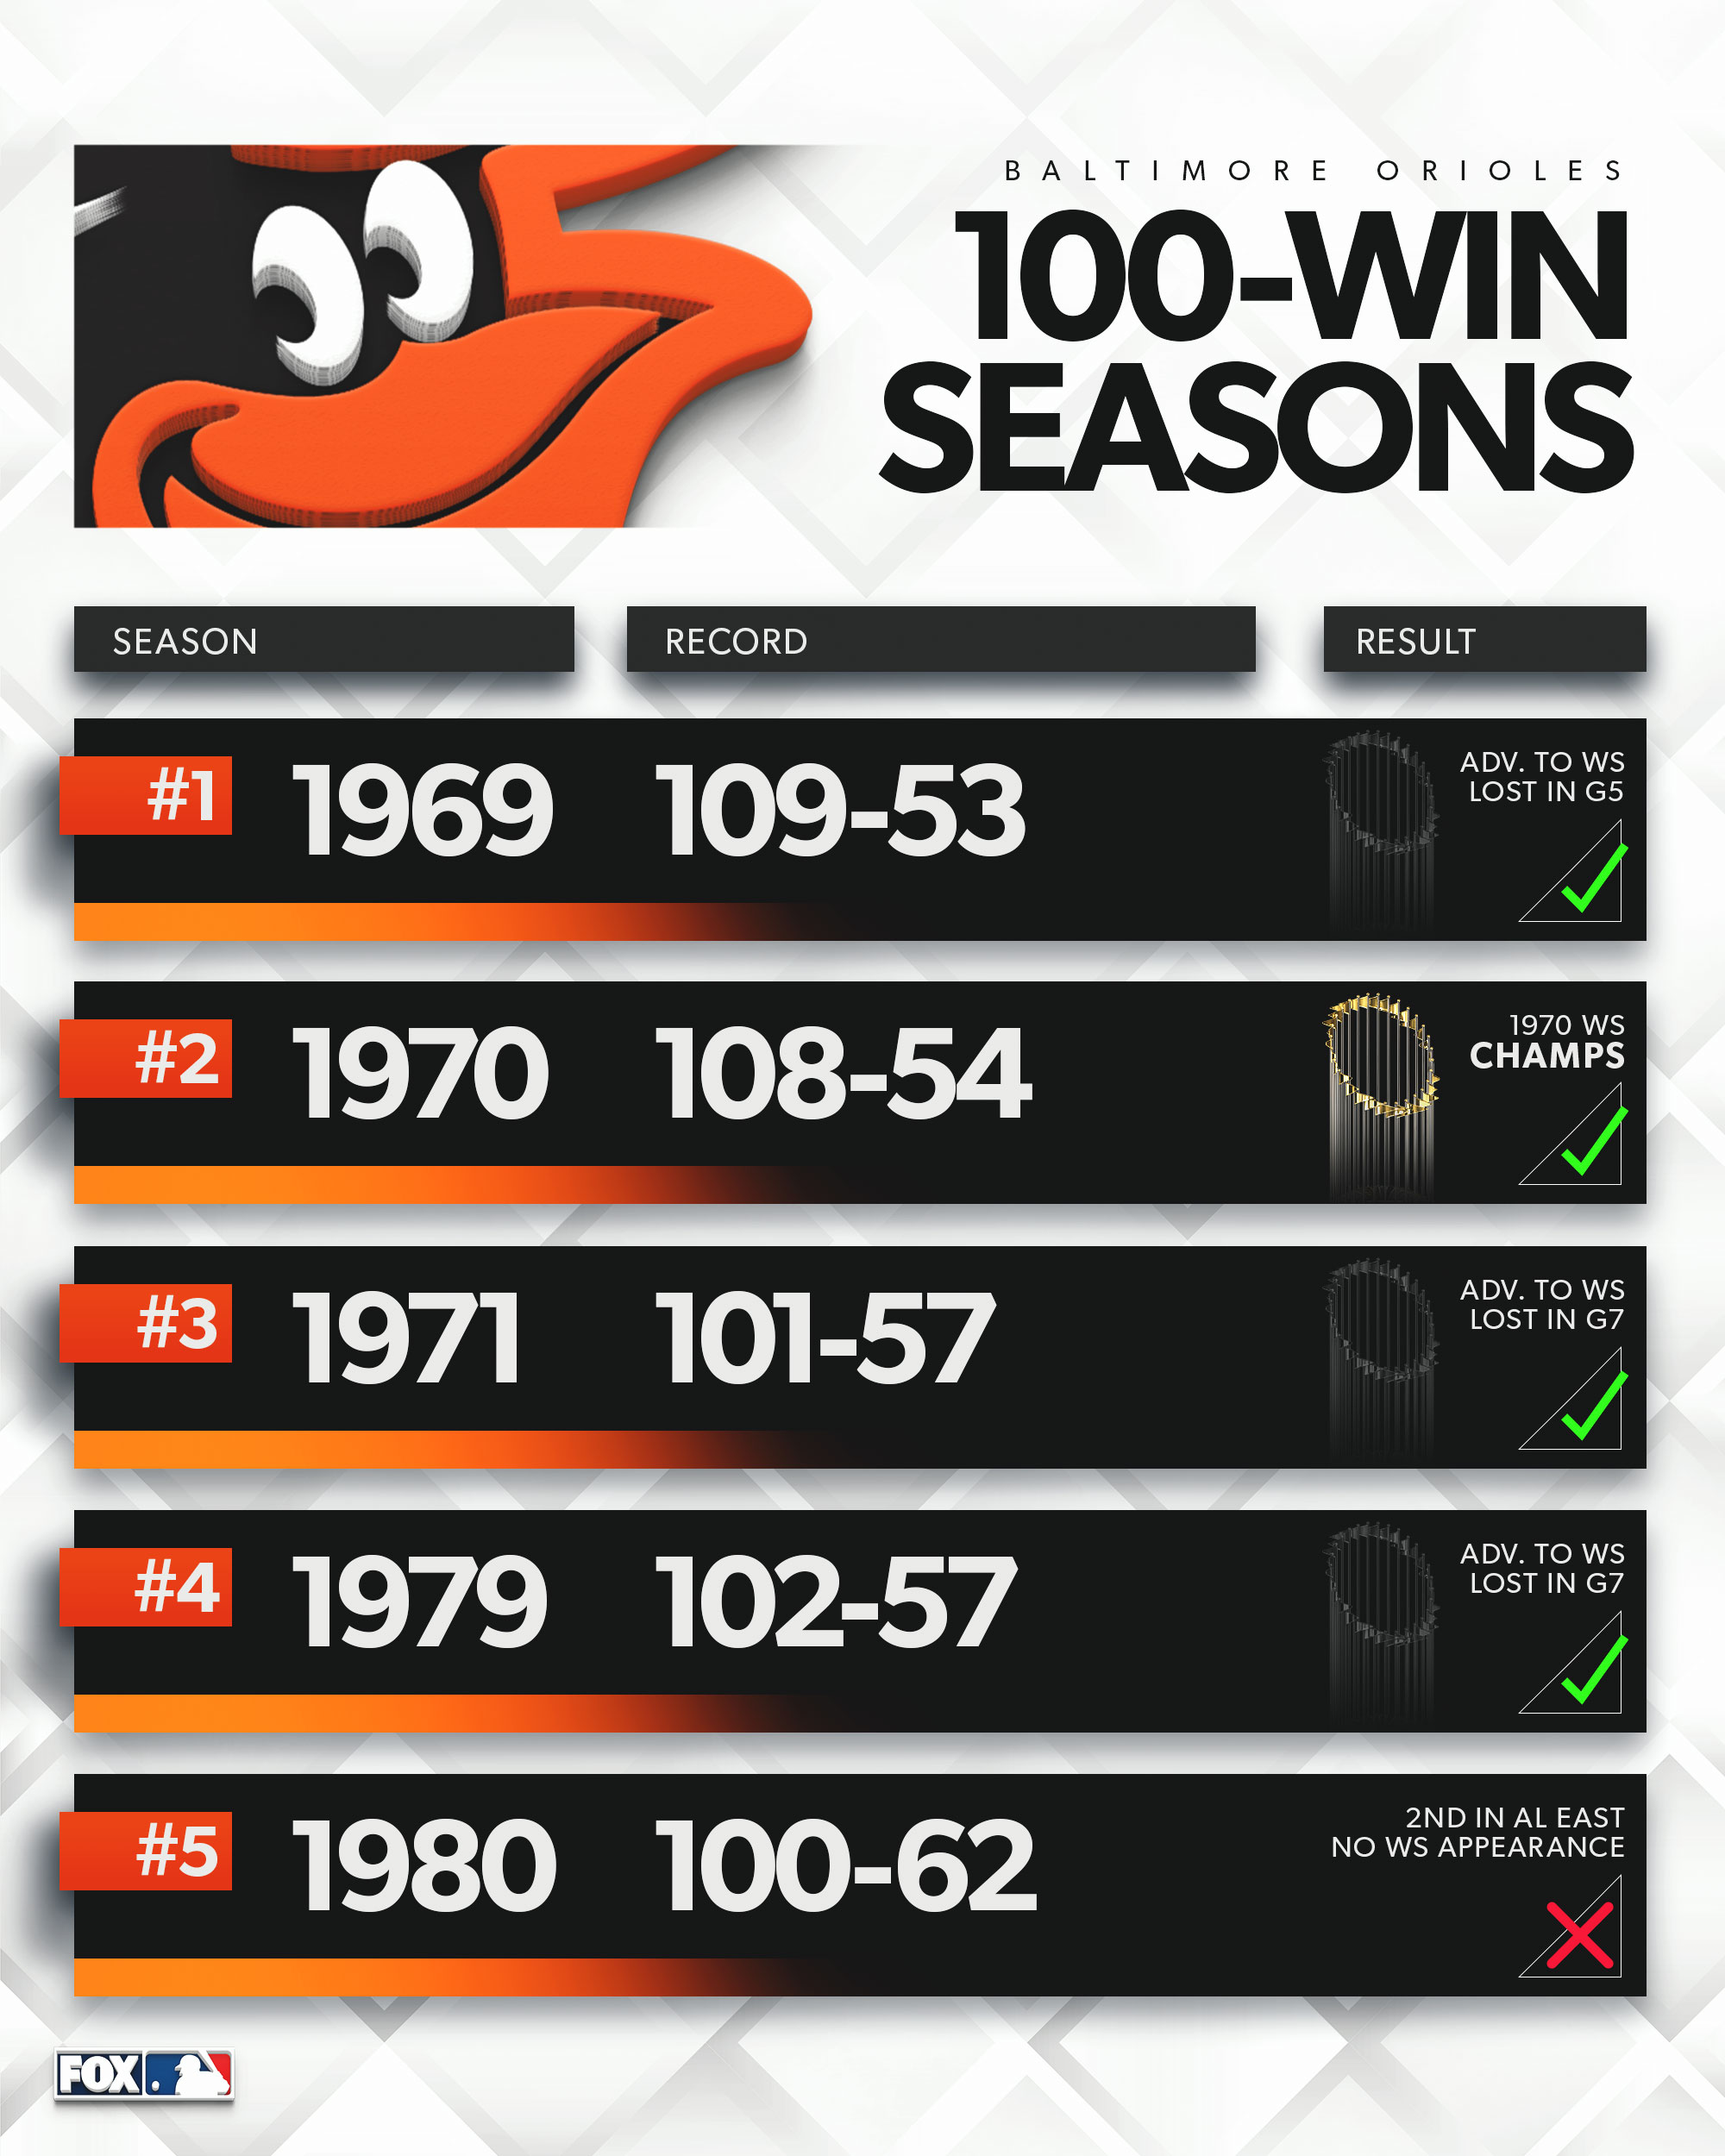 FOX Sports: MLB on X: Of the previous 5 @Orioles teams to win 100